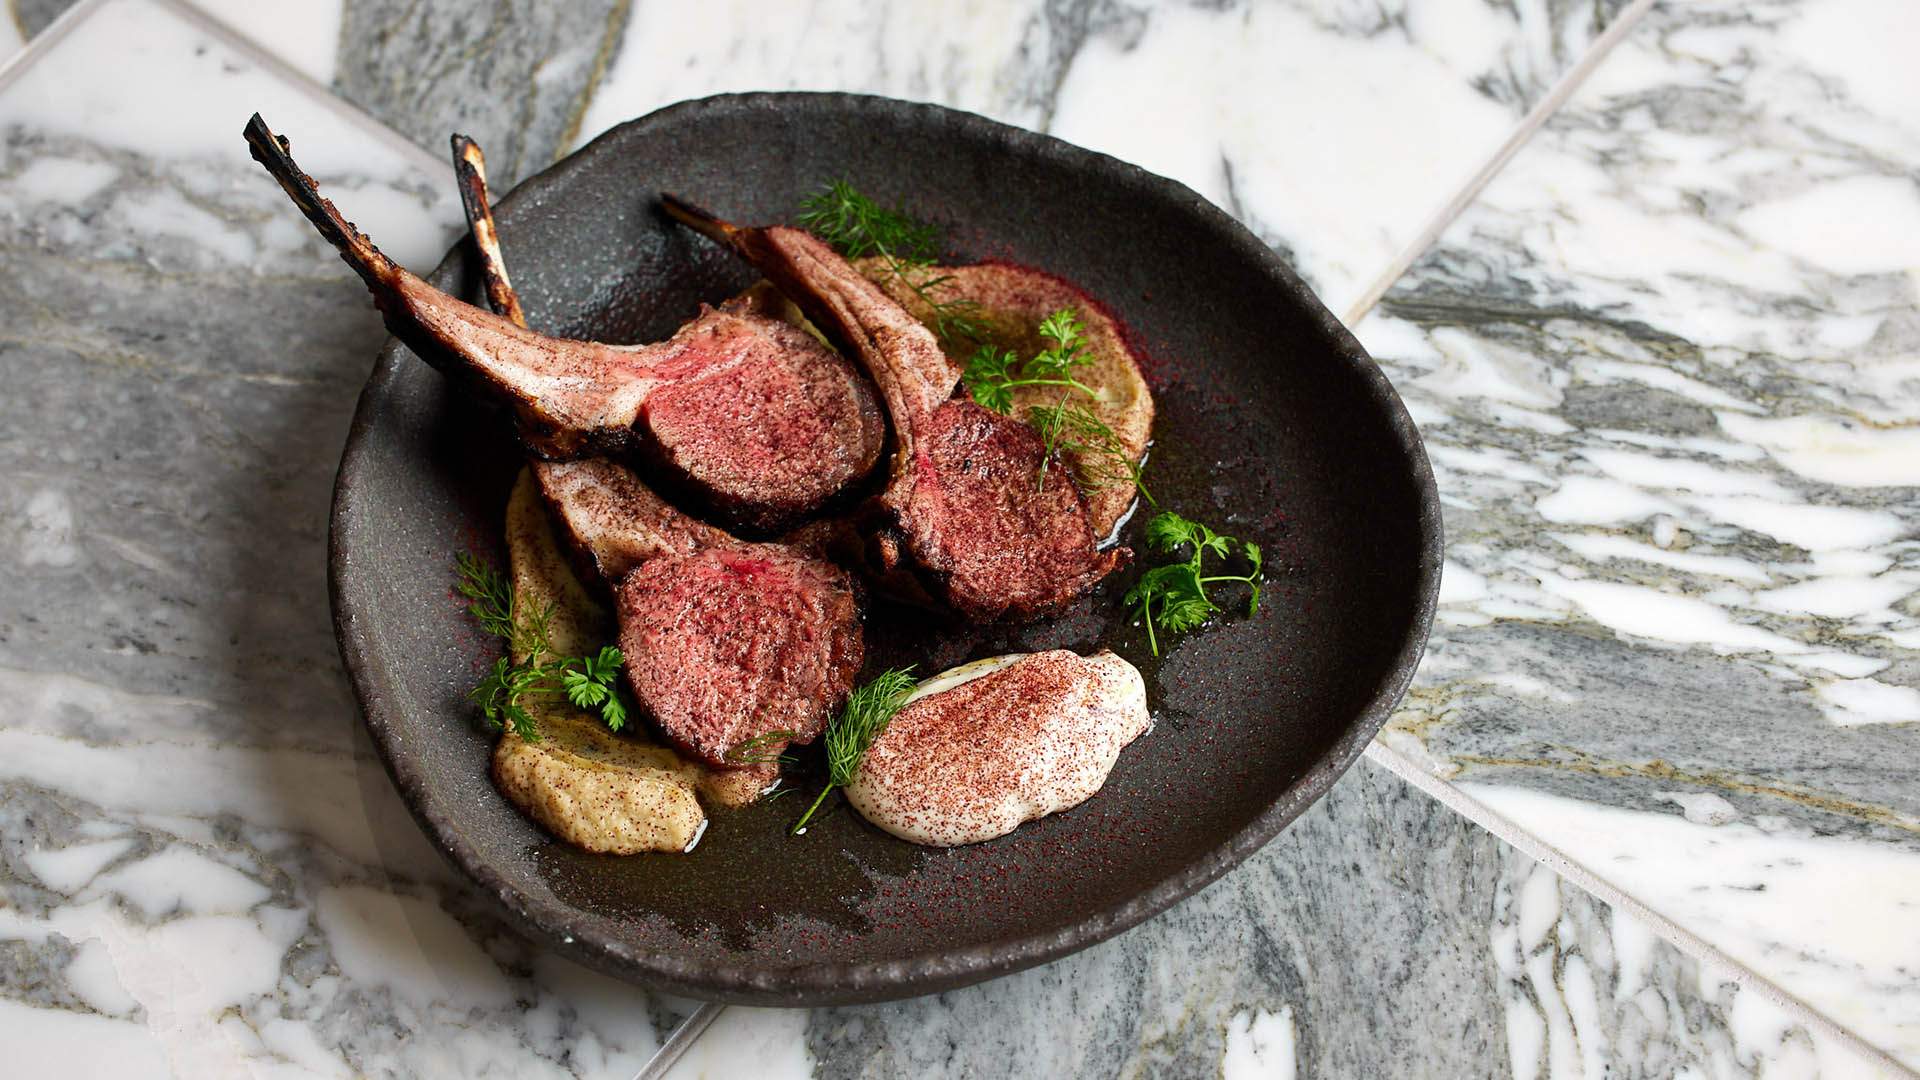 Now Open: West End Just Scored a New Steak Haven with Manhattan-Inspired Restaurant Rich & Rare